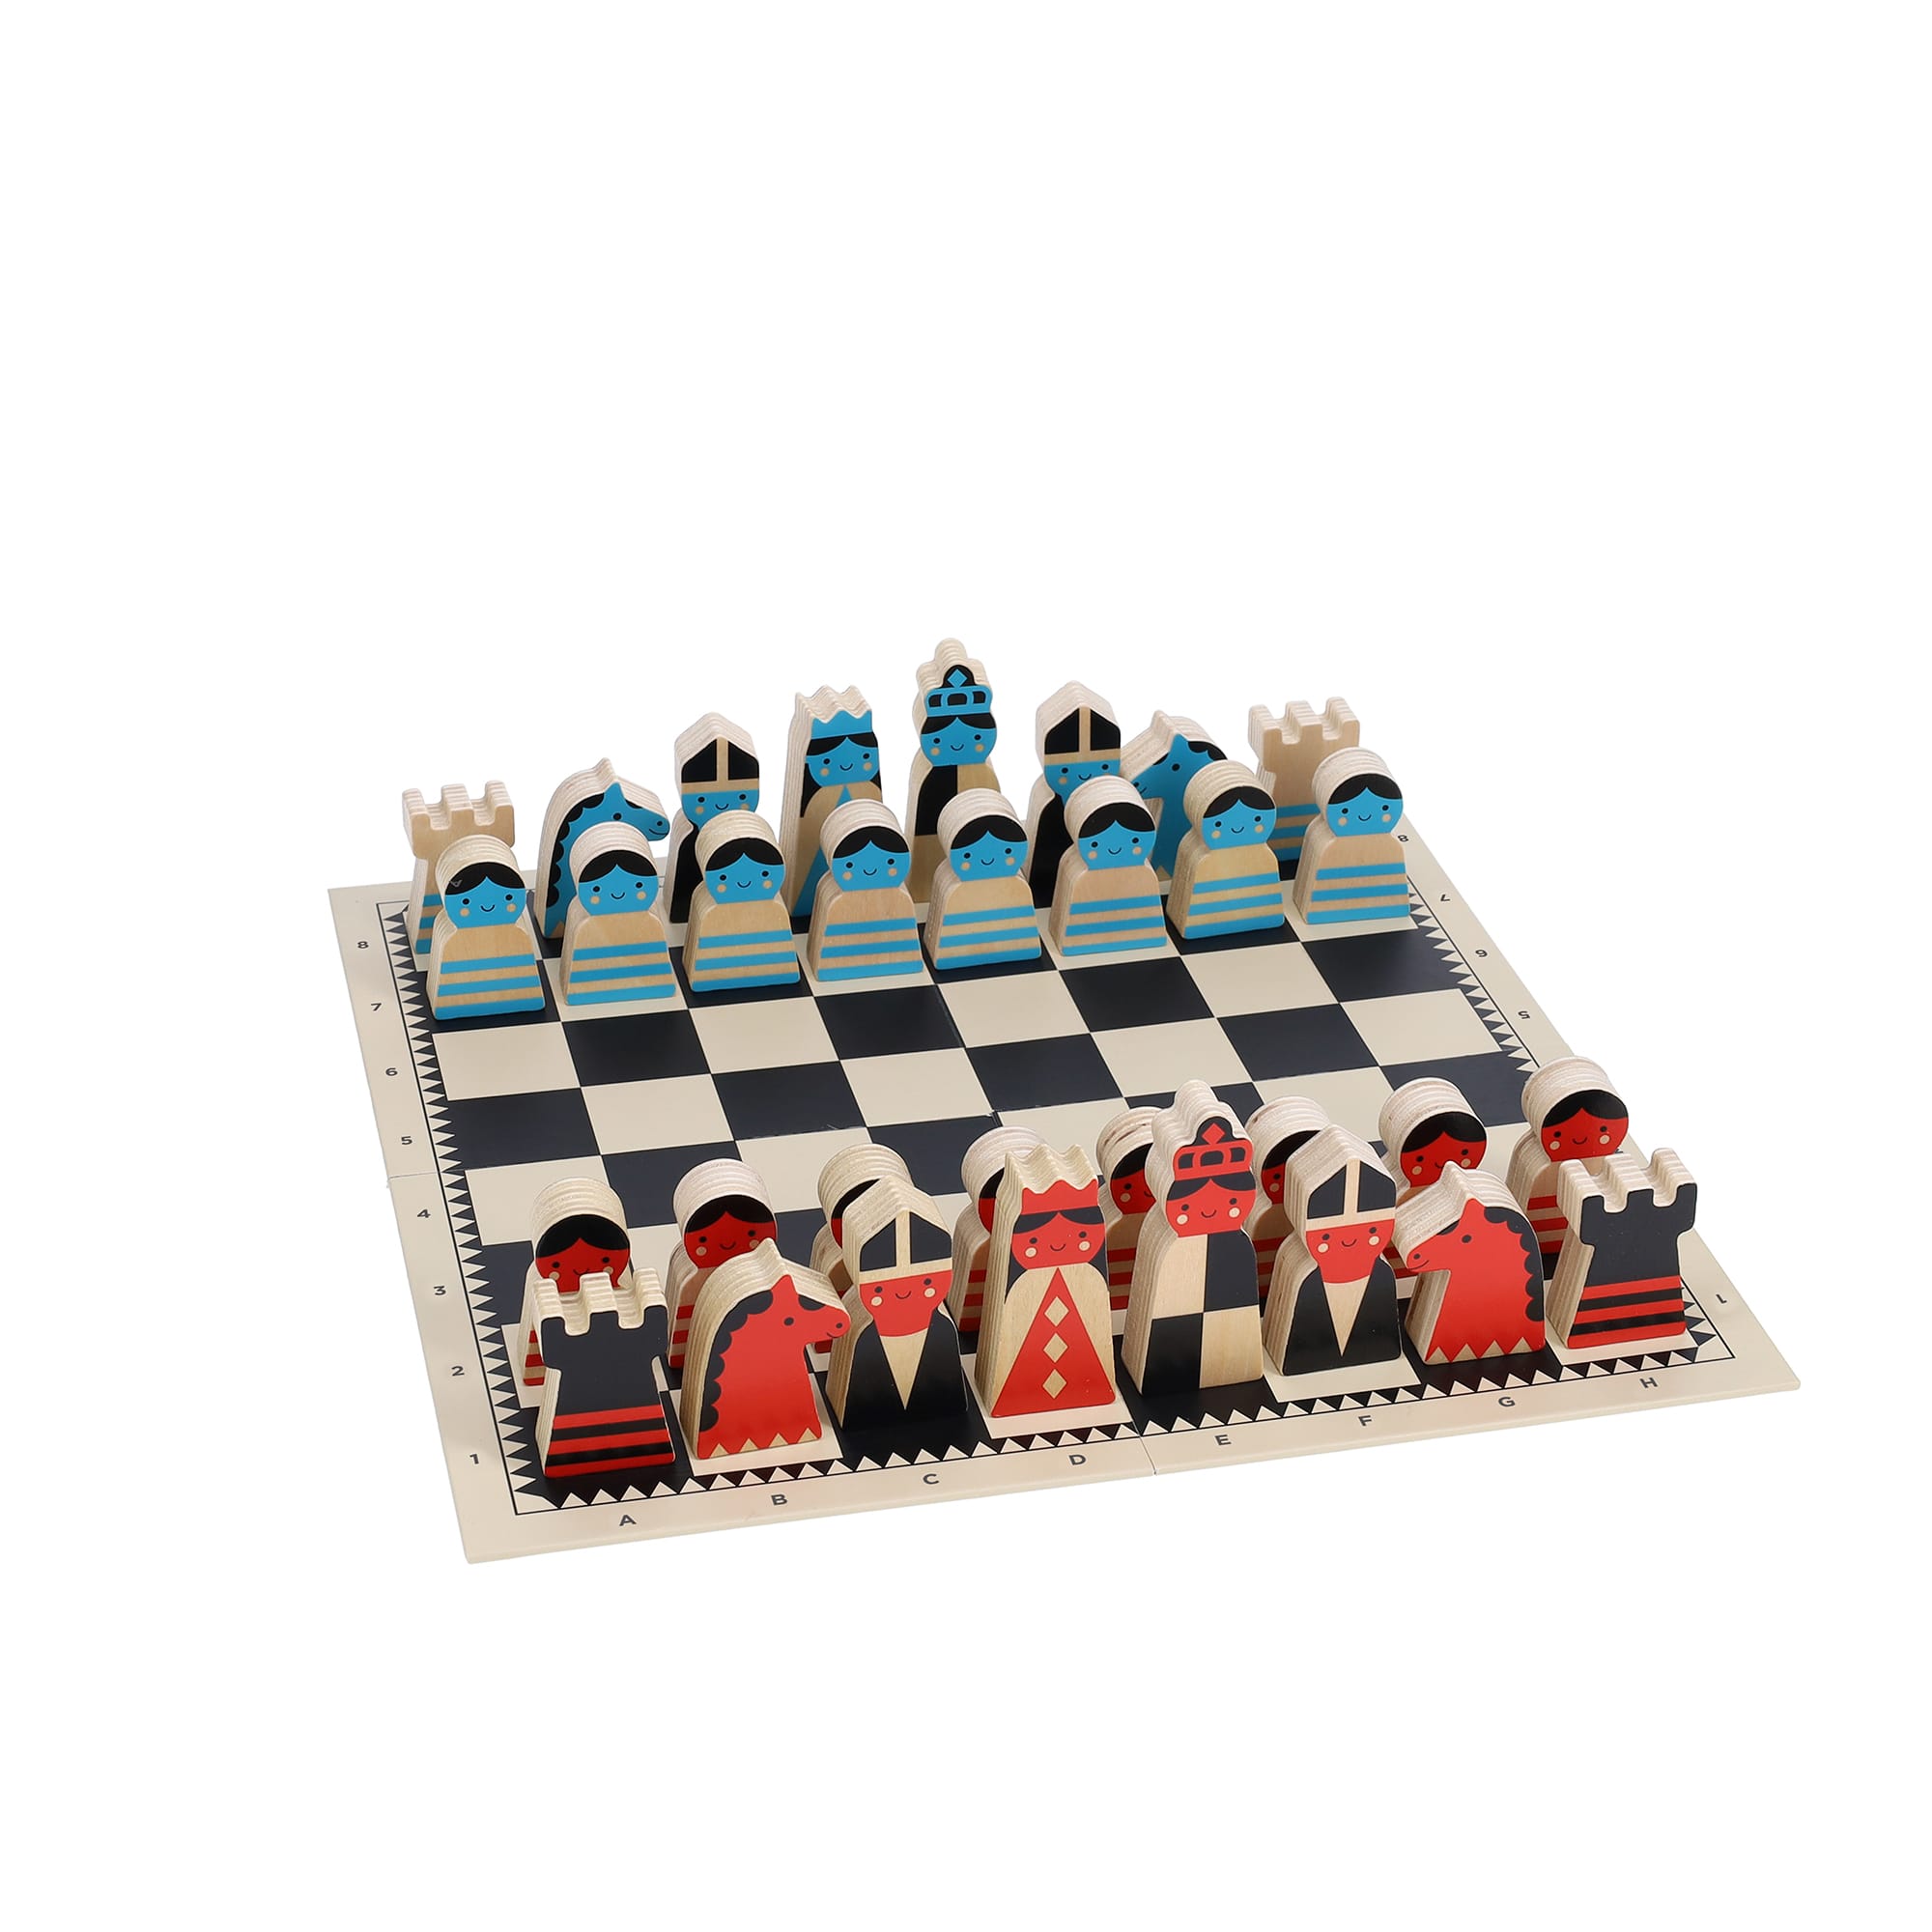 This Little Wood Chess Set Goes Anywhere